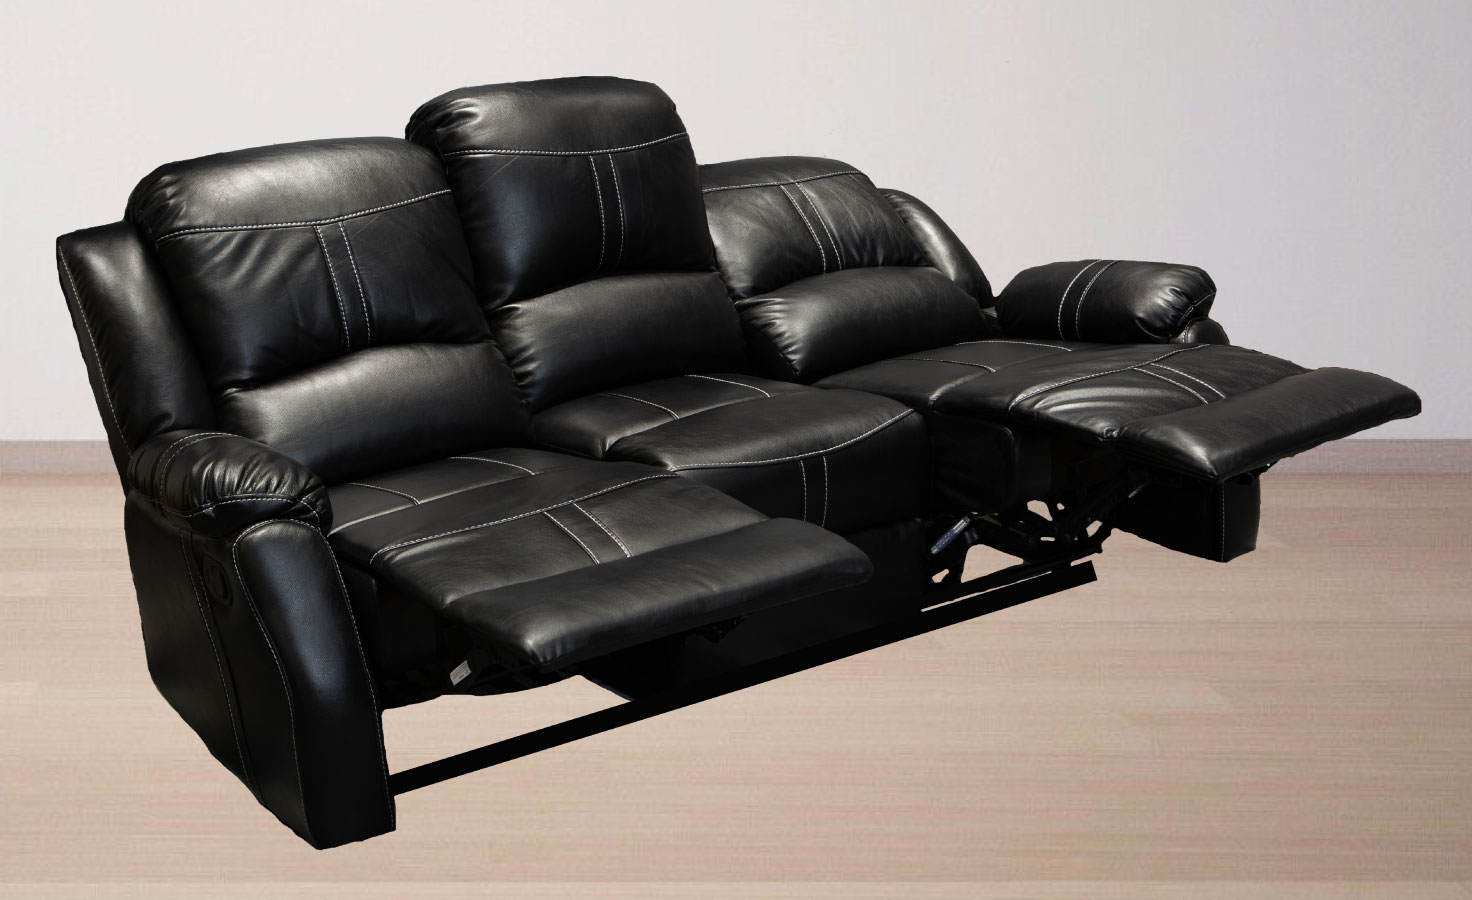 Lorraine BelAire Deluxe Ebony Reclining Sofa in Reclined Position Right Profile Shot by American Home Line